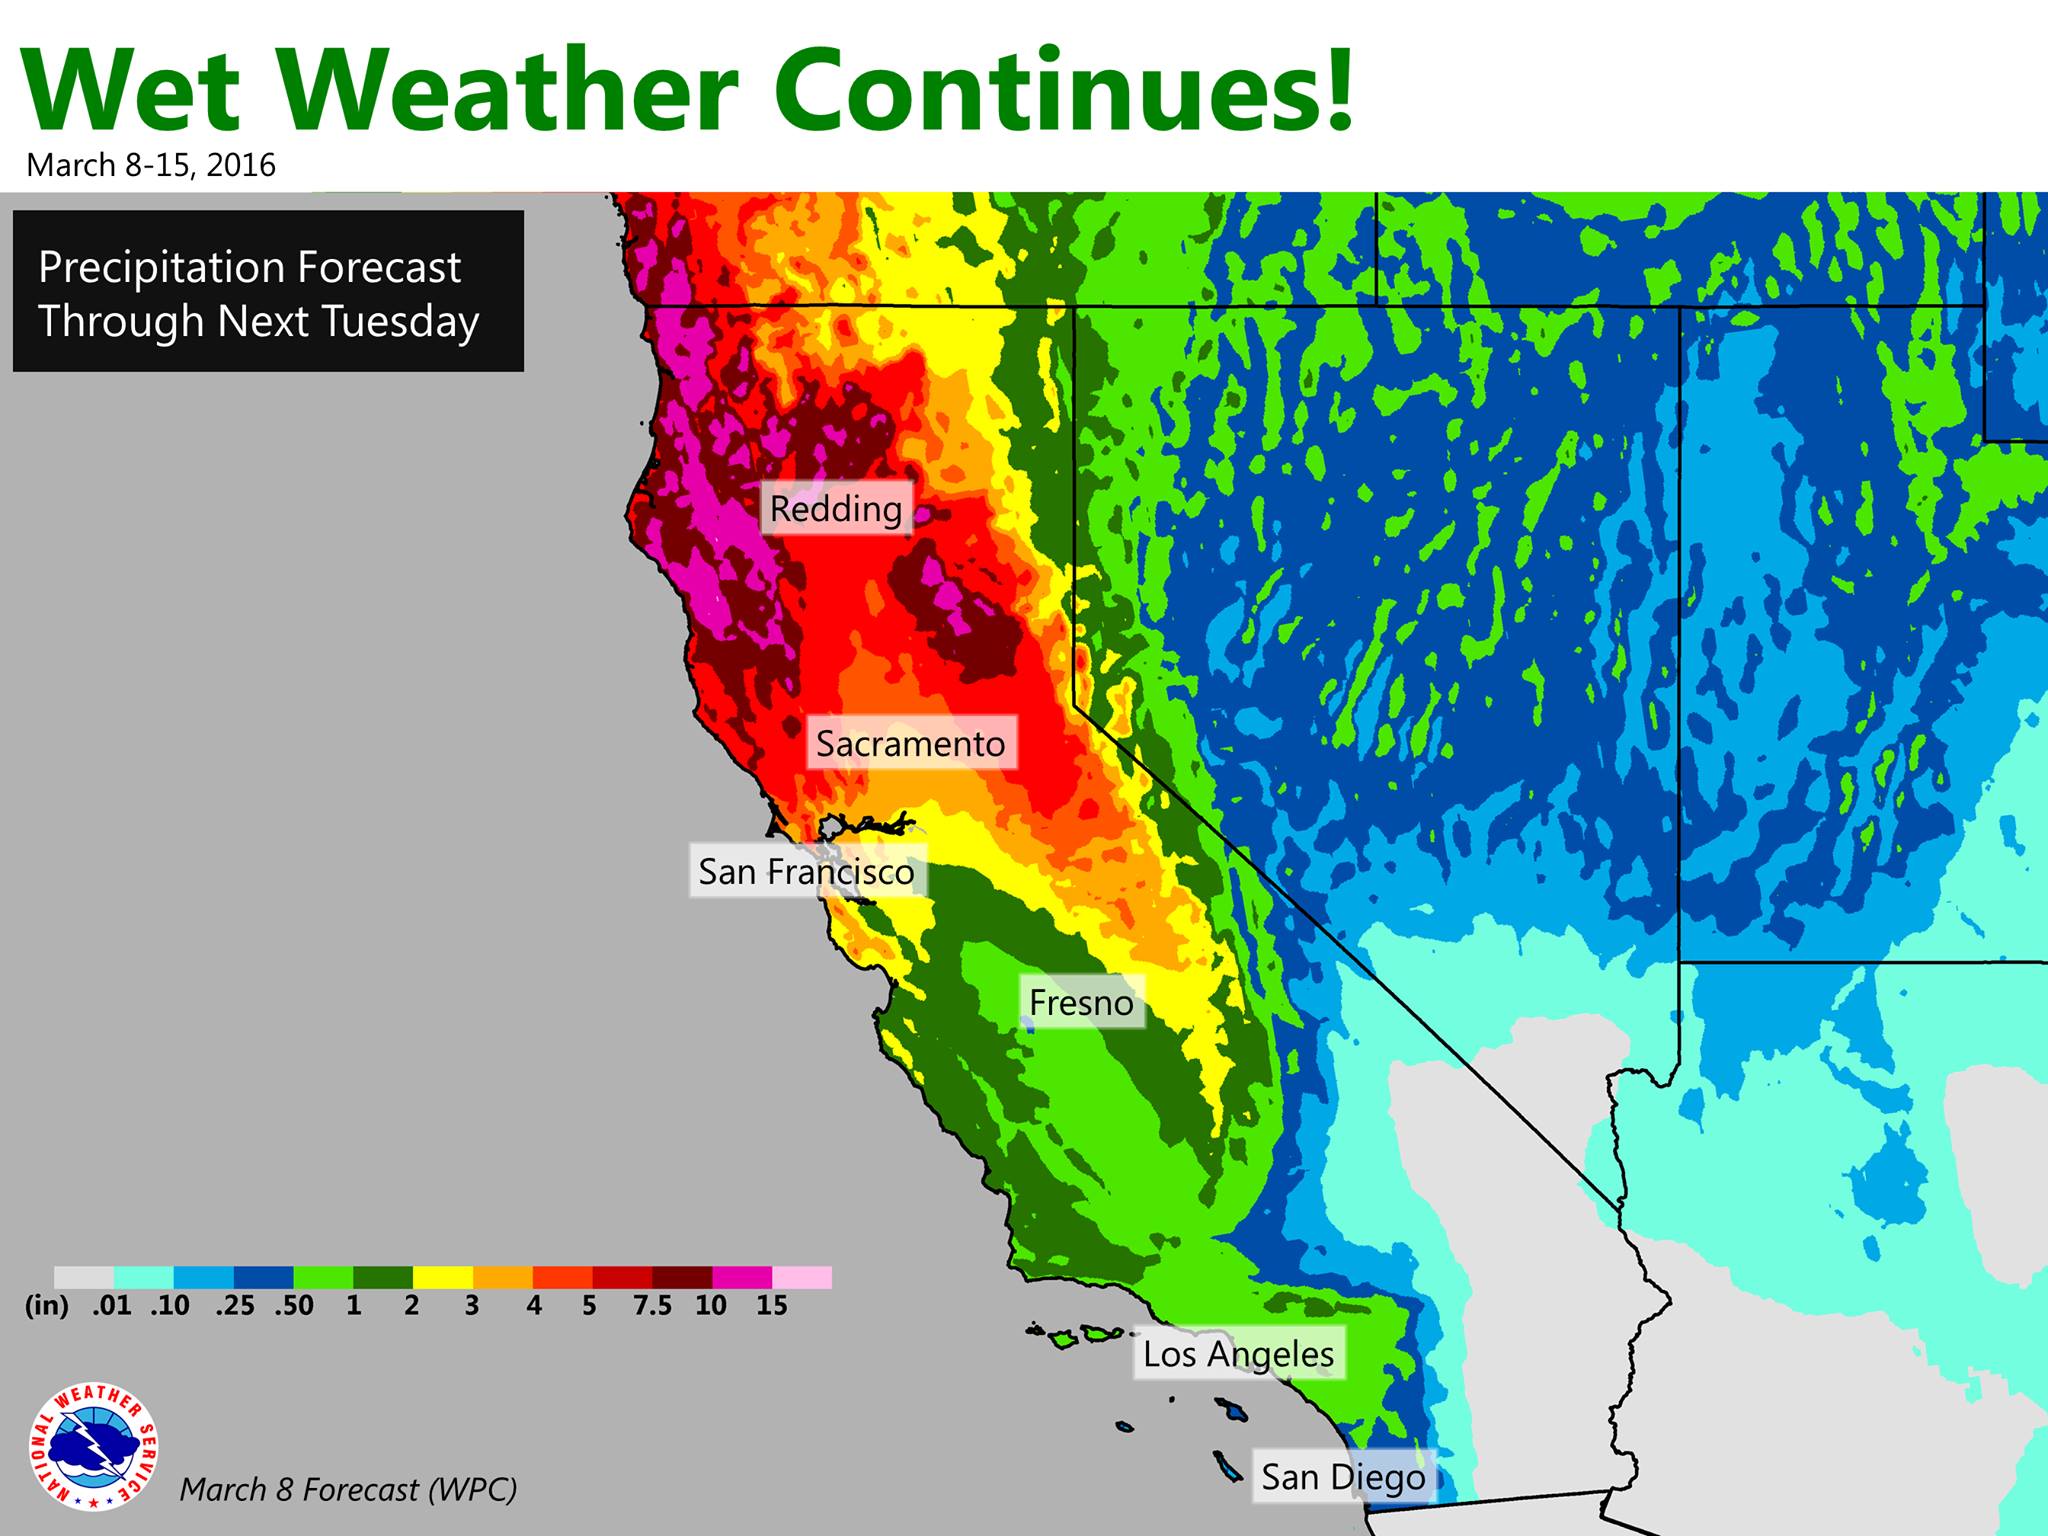 "Heavier precipitation will return Thursday across much of Northern California, with plentiful amounts expected through the weekend!" - NOAA Sacramento, CA today